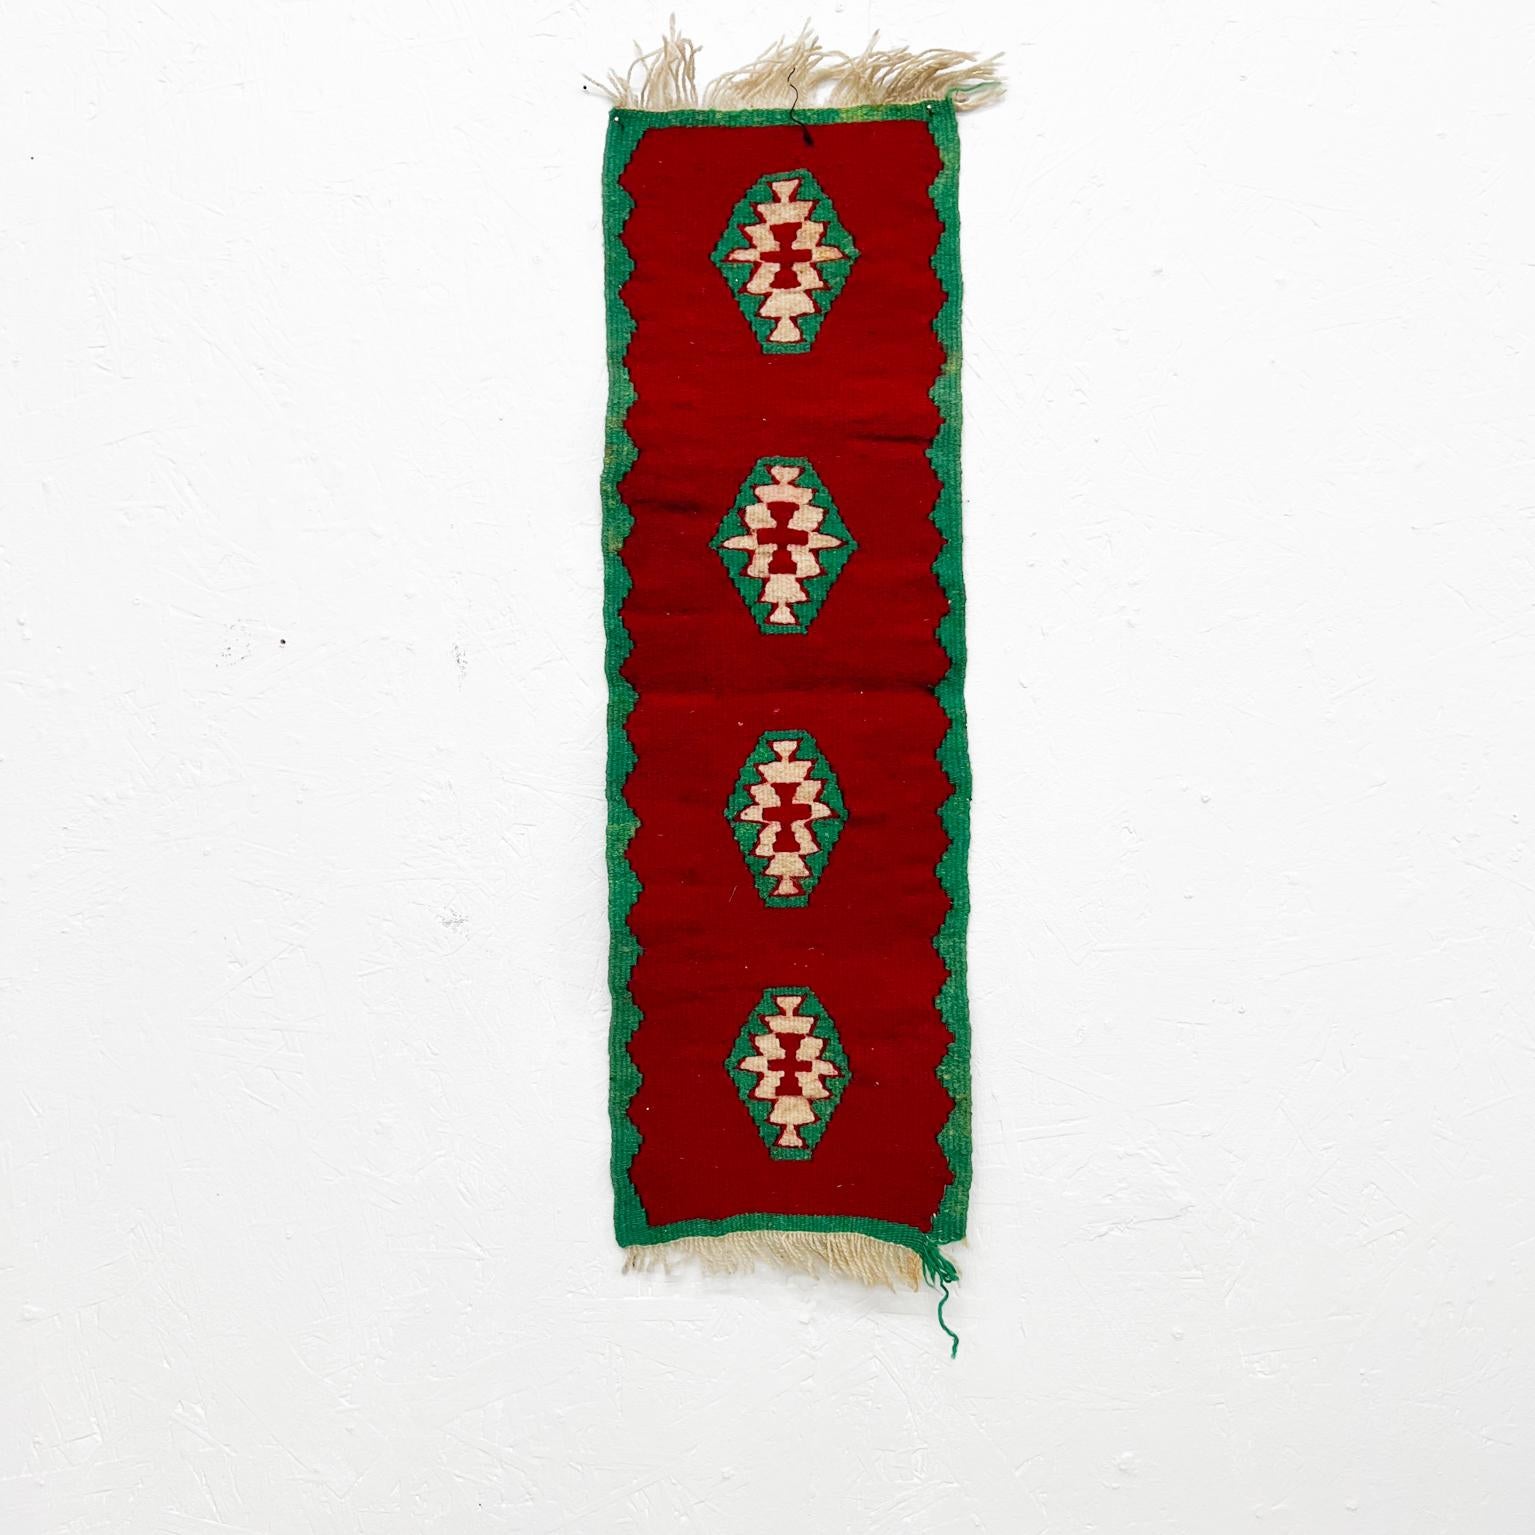 
Vintage Mexican Wool Textile Art Red and Green Tapestry
9.38 x 32
Original unrestored vintage condition
See all images provided

